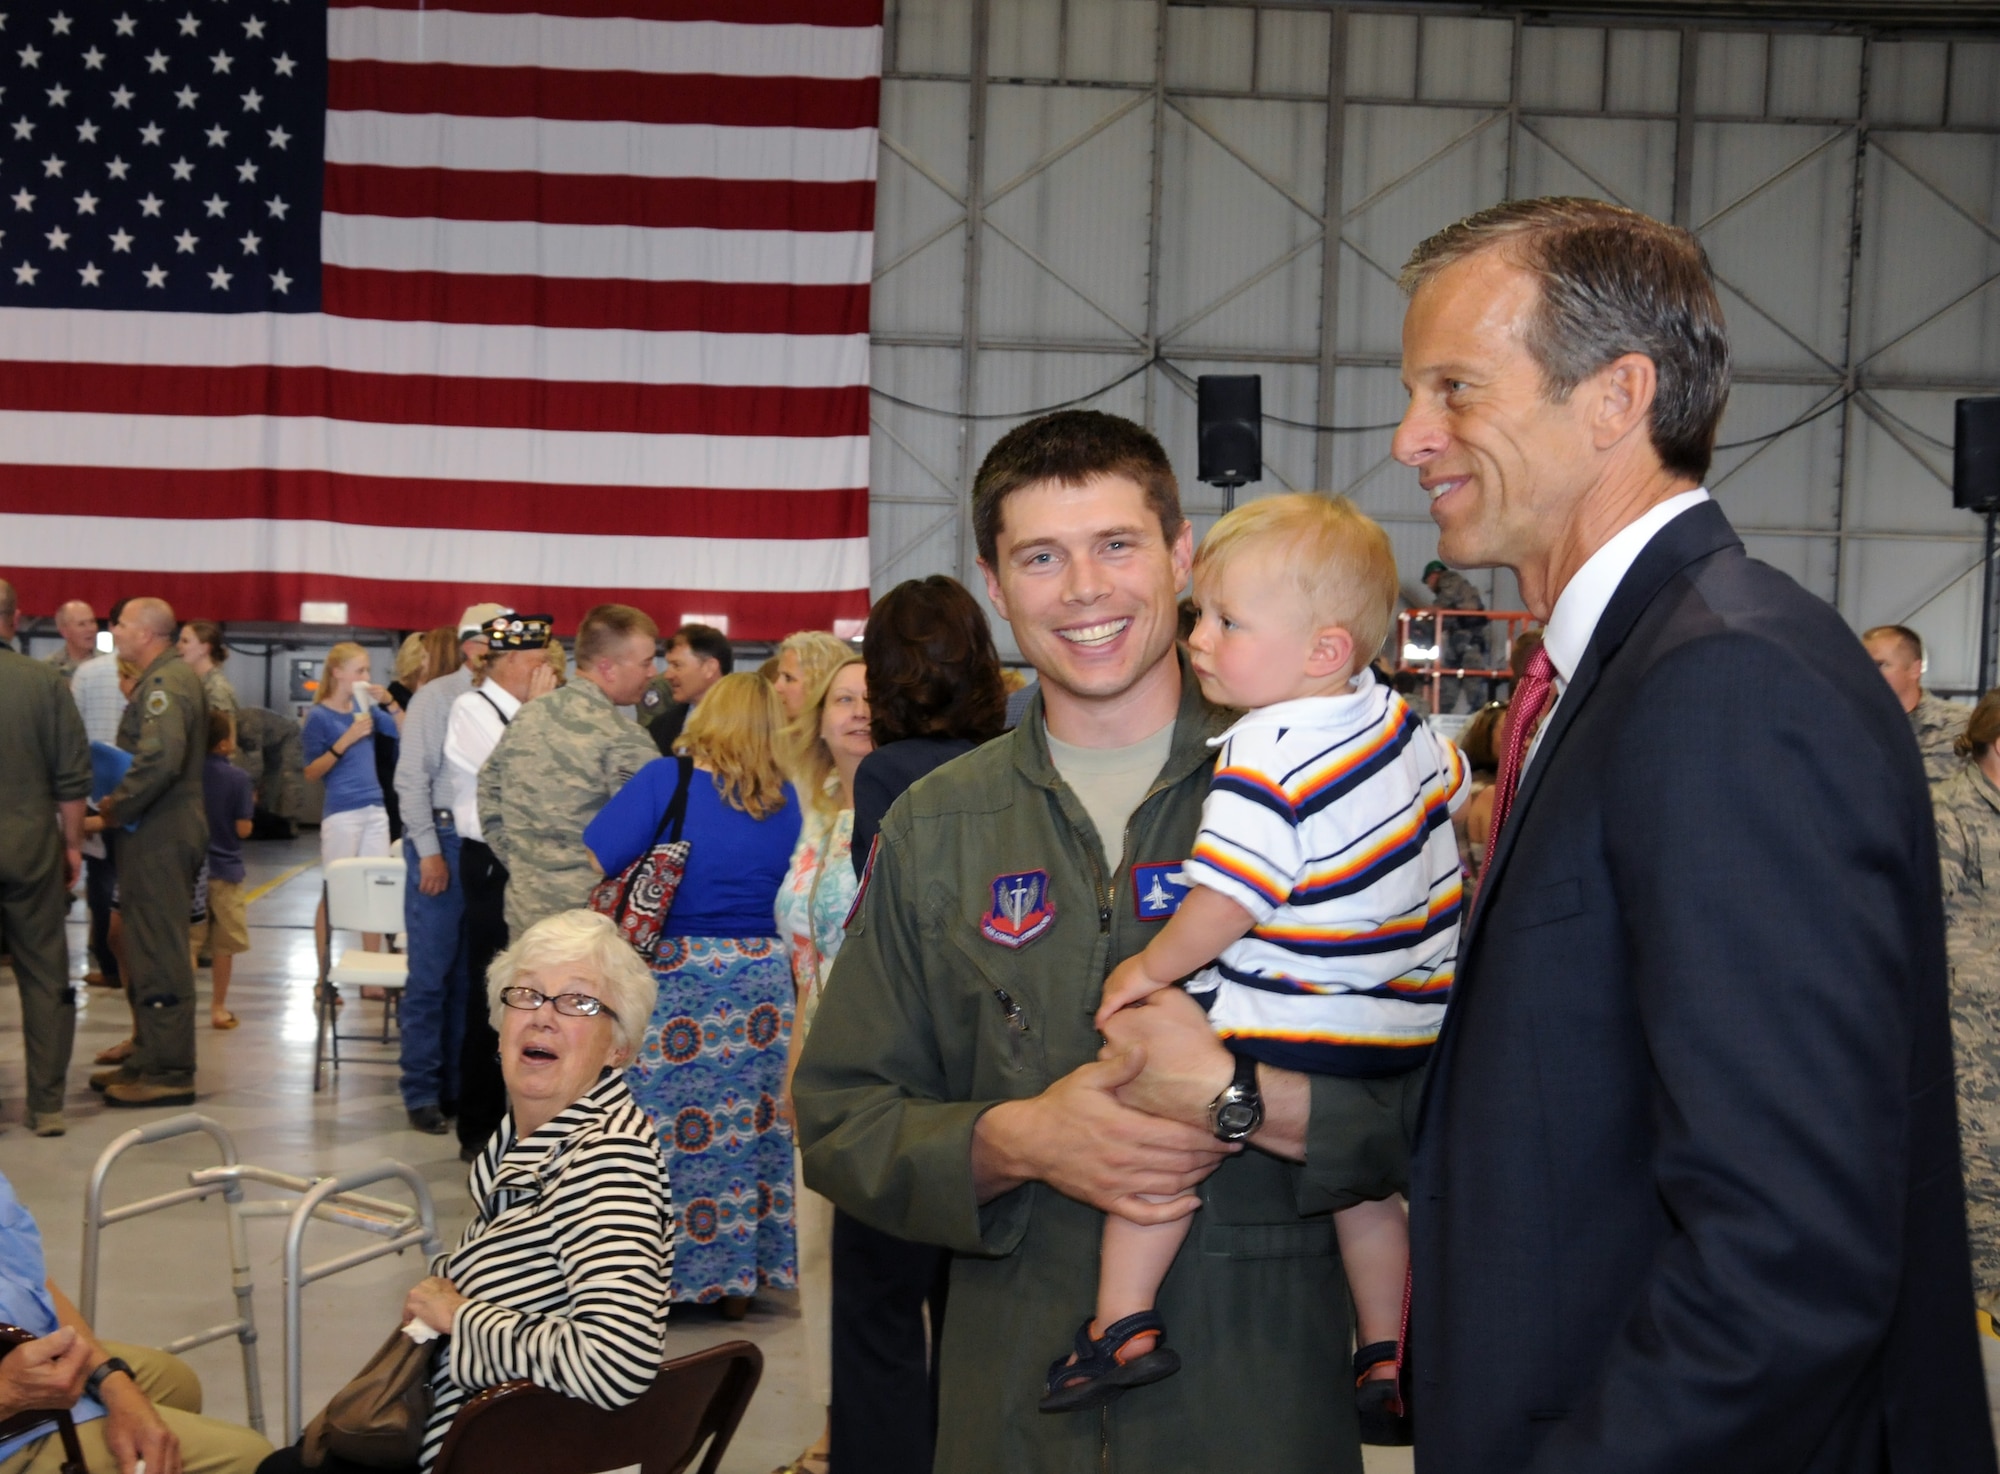 U.S. Sen. John Thune of South Dakota takes a minute to visit with U.S. Air Force Capt. Casey Minor, 175th Fighter Squadron pilot, and his family to thank them for their service after a mobilization ceremony held at Joe Foss Field, S.D., May 3, 2015. Minor will be among the almost 250 members of the South Dakota Air National Guard unit who are slated to deploy to South Korea in support of a rotational Theater Security Package. (U.S. Air National Guard photo by Staff Sgt. Luke Olson)